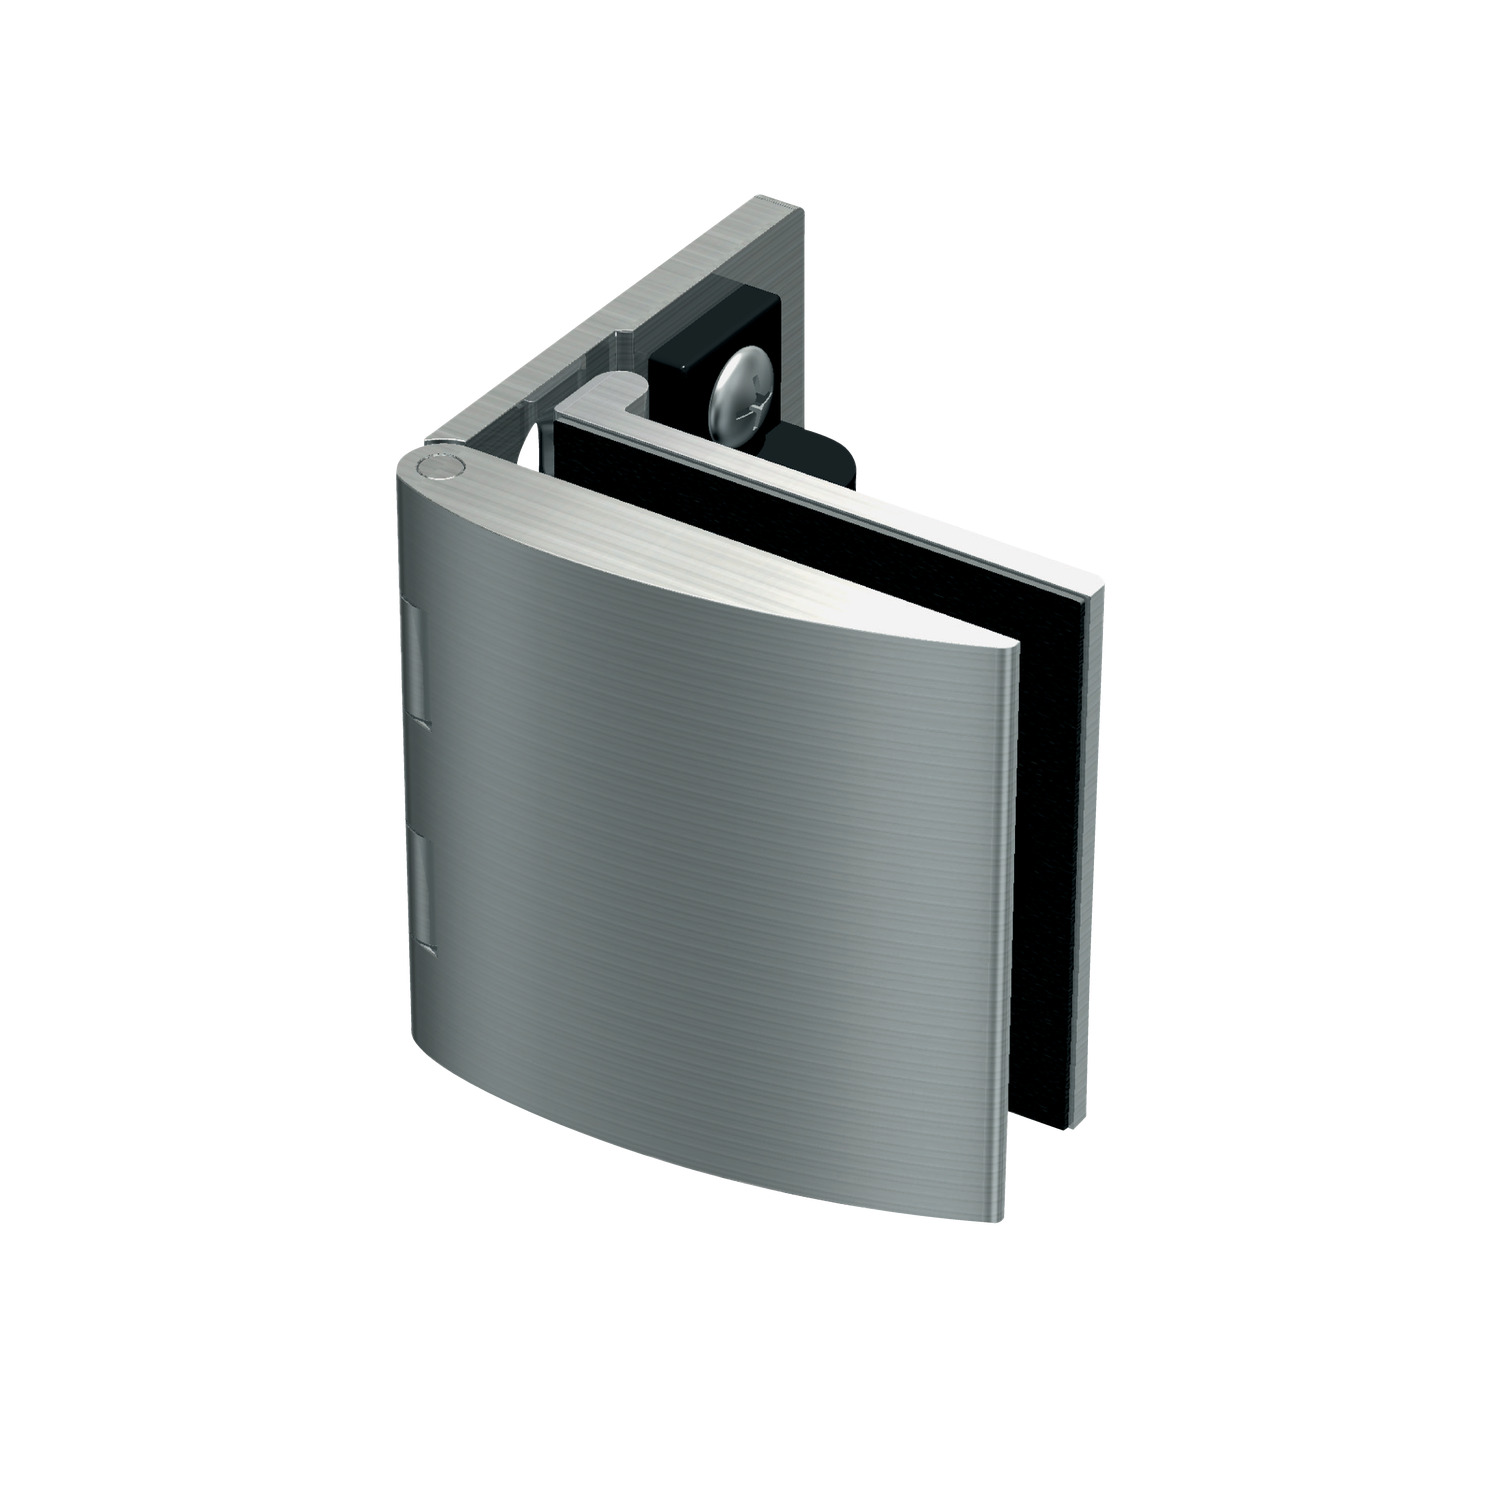 Glass Door Hinges - Inset Type vailable in brass with nickel, chrome or gold finish. Spacers can be used to suit different door thicknesses, with none needed for a maximum thickness of 8mm. Plastic catch design holds door in closed position.